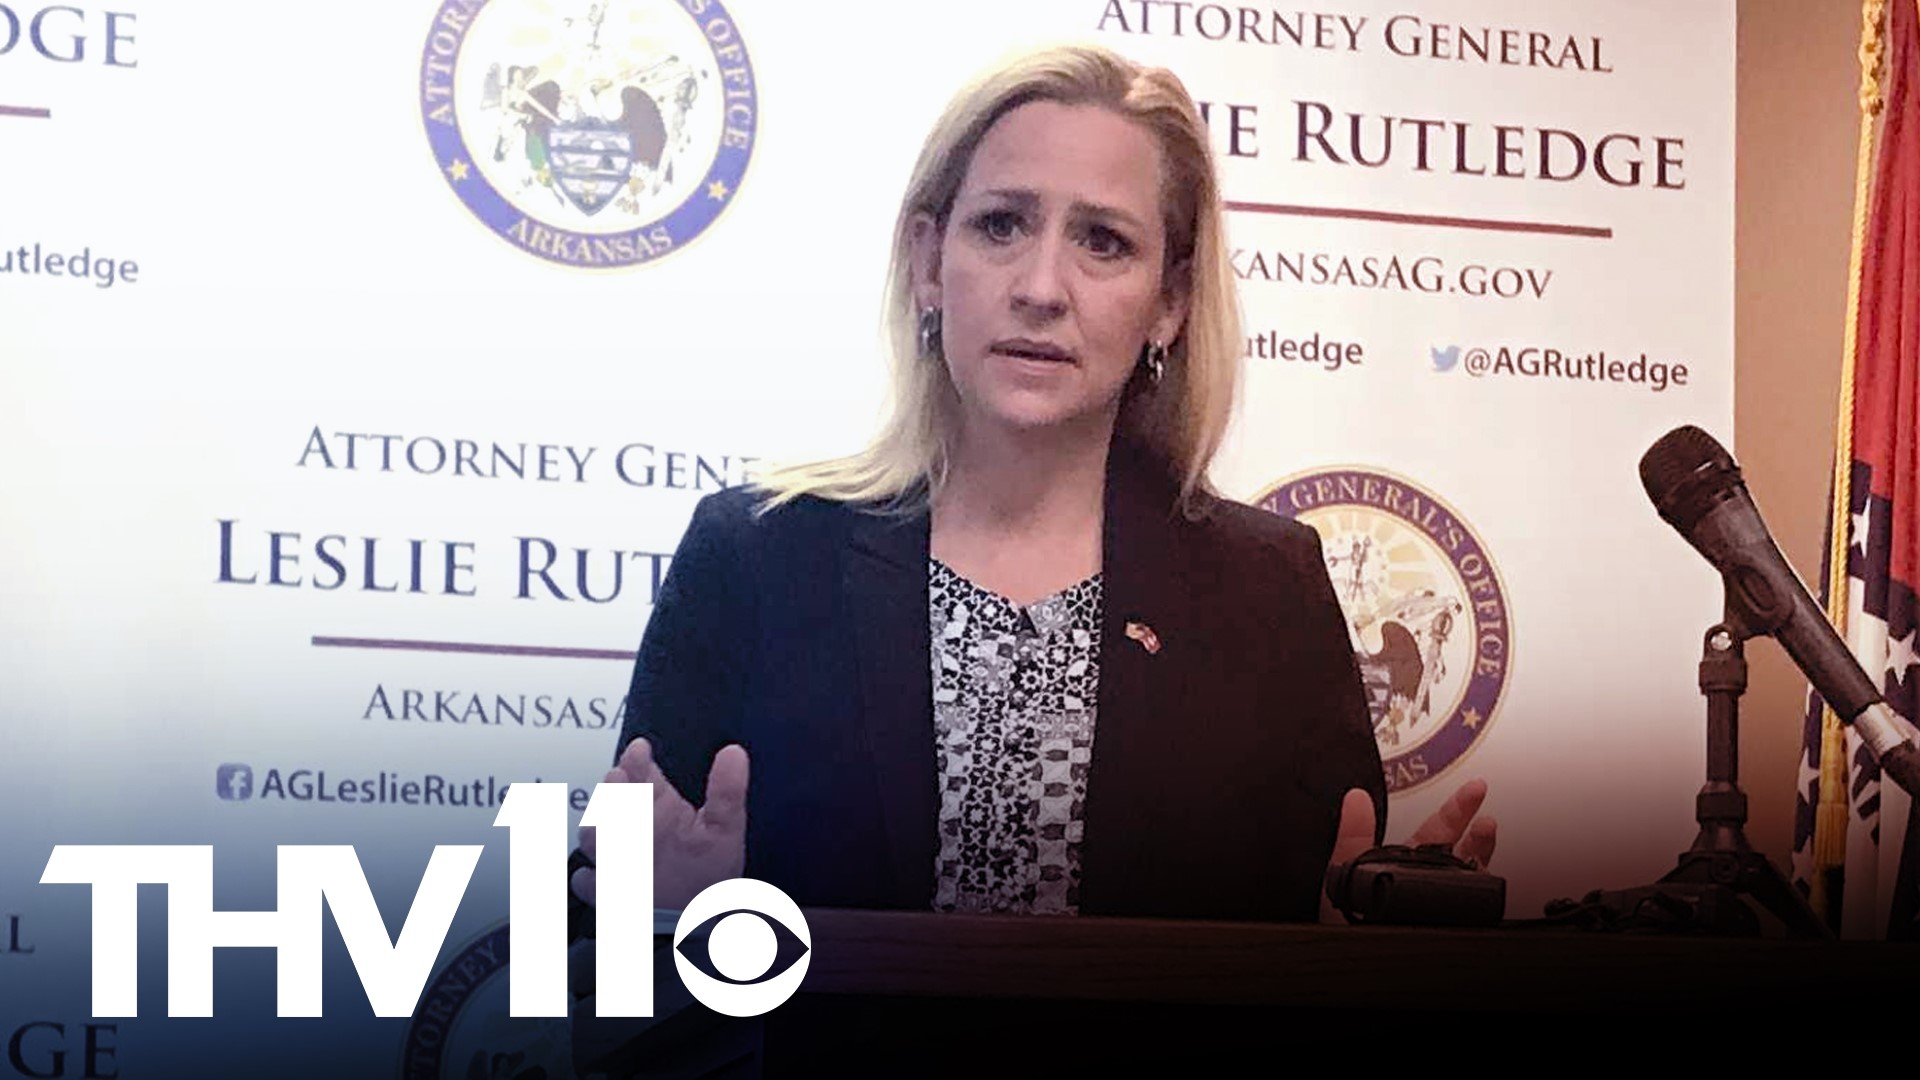 Attorney General Leslie Rutledge announced Tuesday that she would end her bid for governor of Arkansas and will run for lieutenant governor.